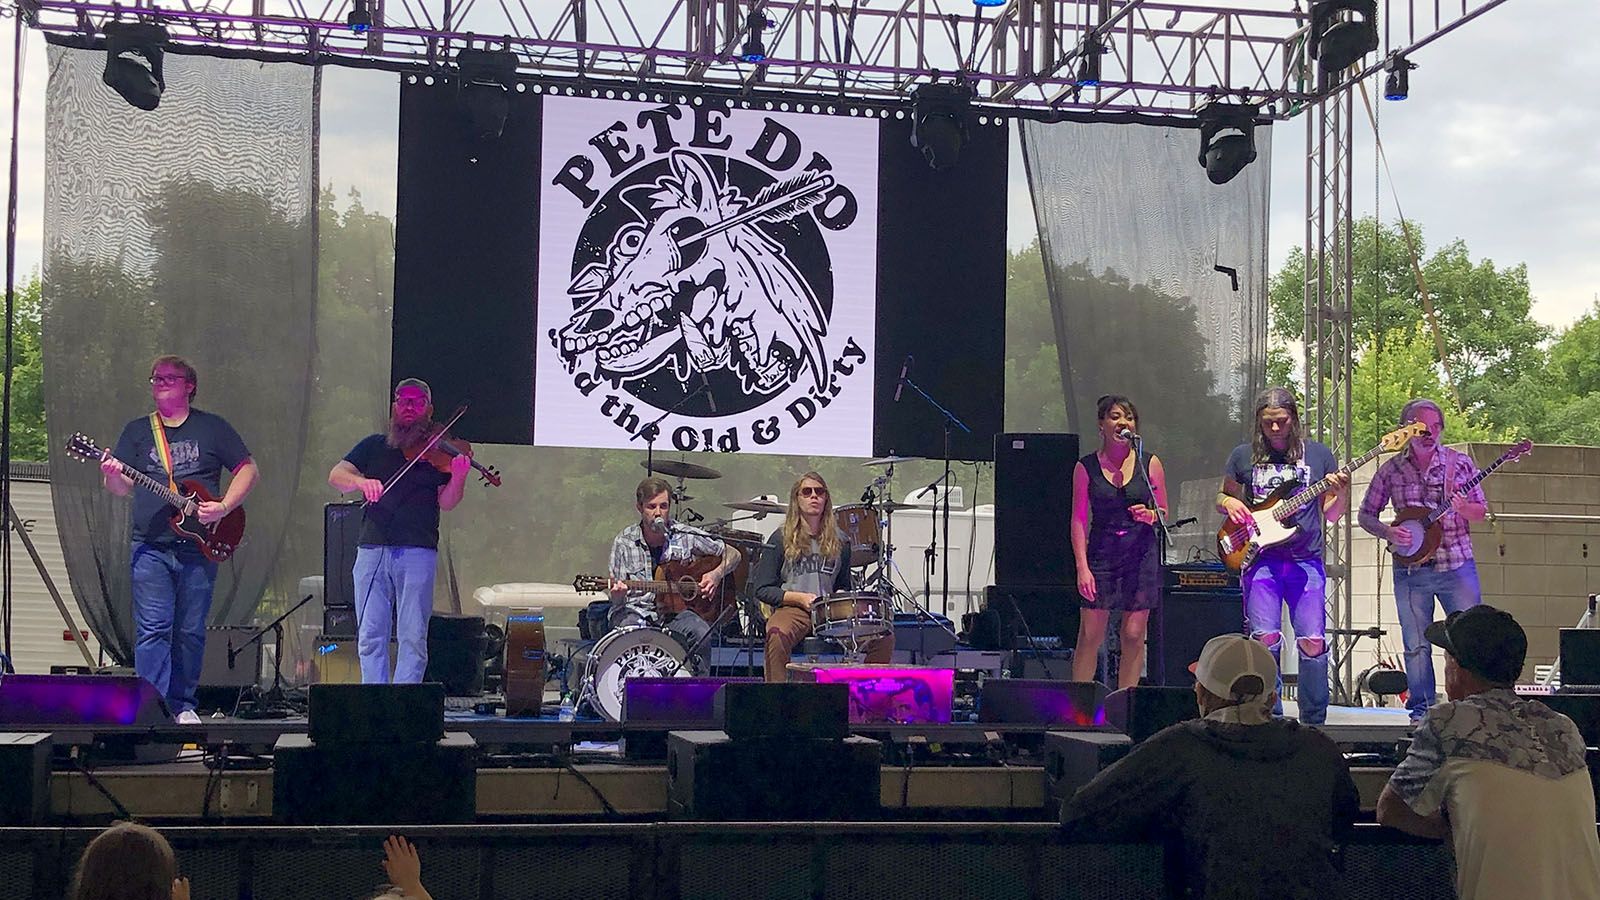 Pete Dio and The Old & Dirty, from left, Mitch Fraizer, Felix Moxter, Pete Dio, Carter Thomas, Diamond Wyrembelski, Steve Rief, and John Warner, perform at last summer’s Three Rivers Festival.